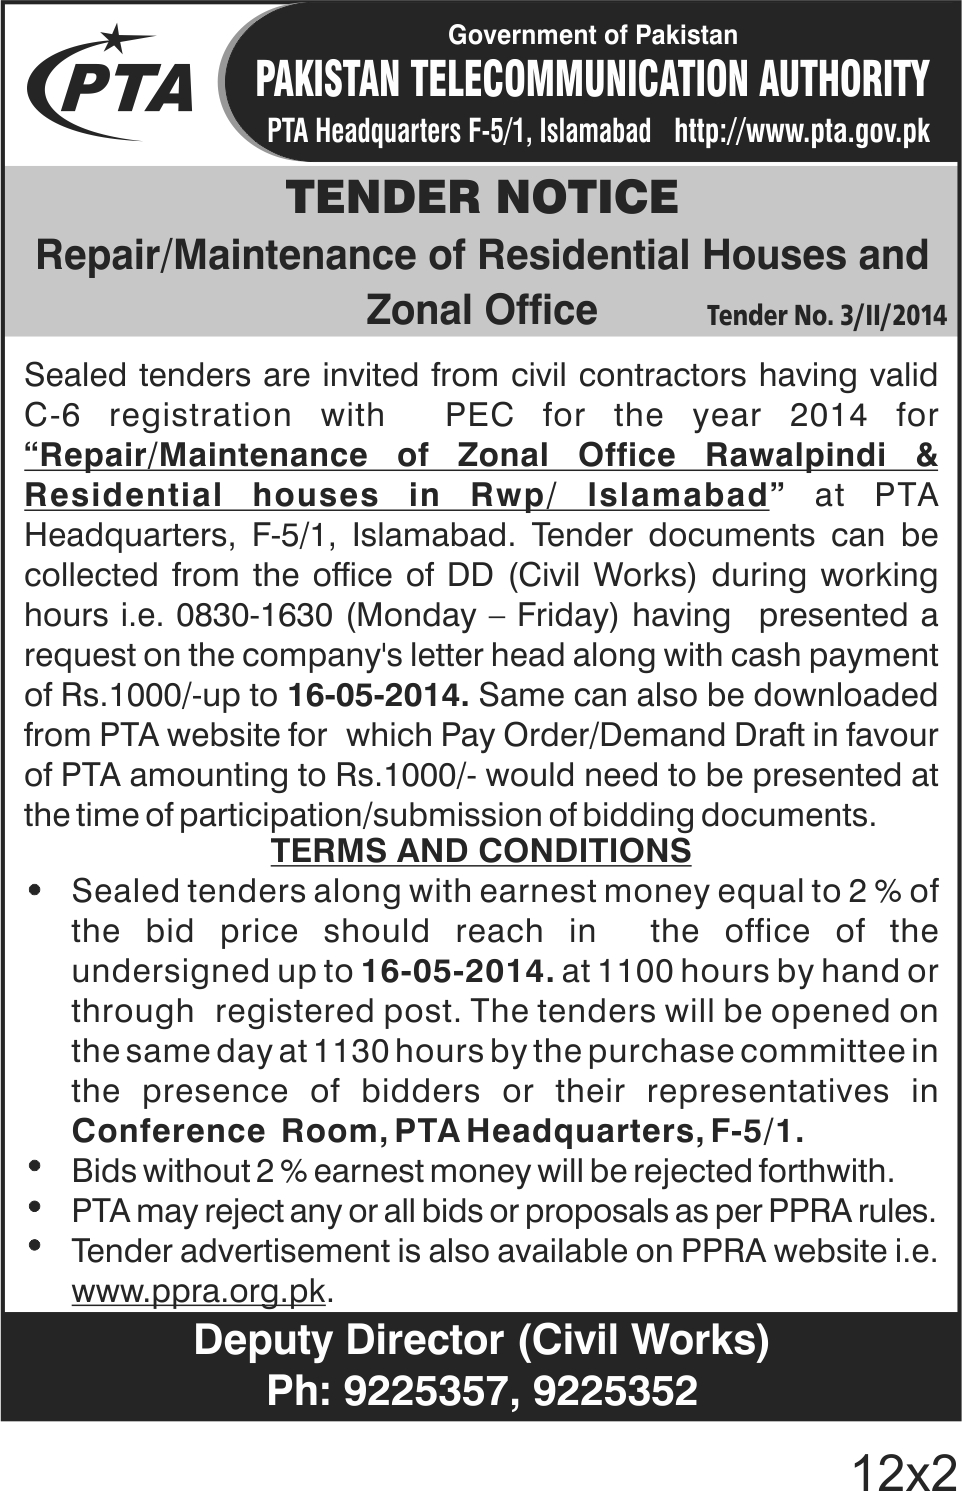  Tender Document for Repair / Maintenance of Residential Houses and Zonal Office